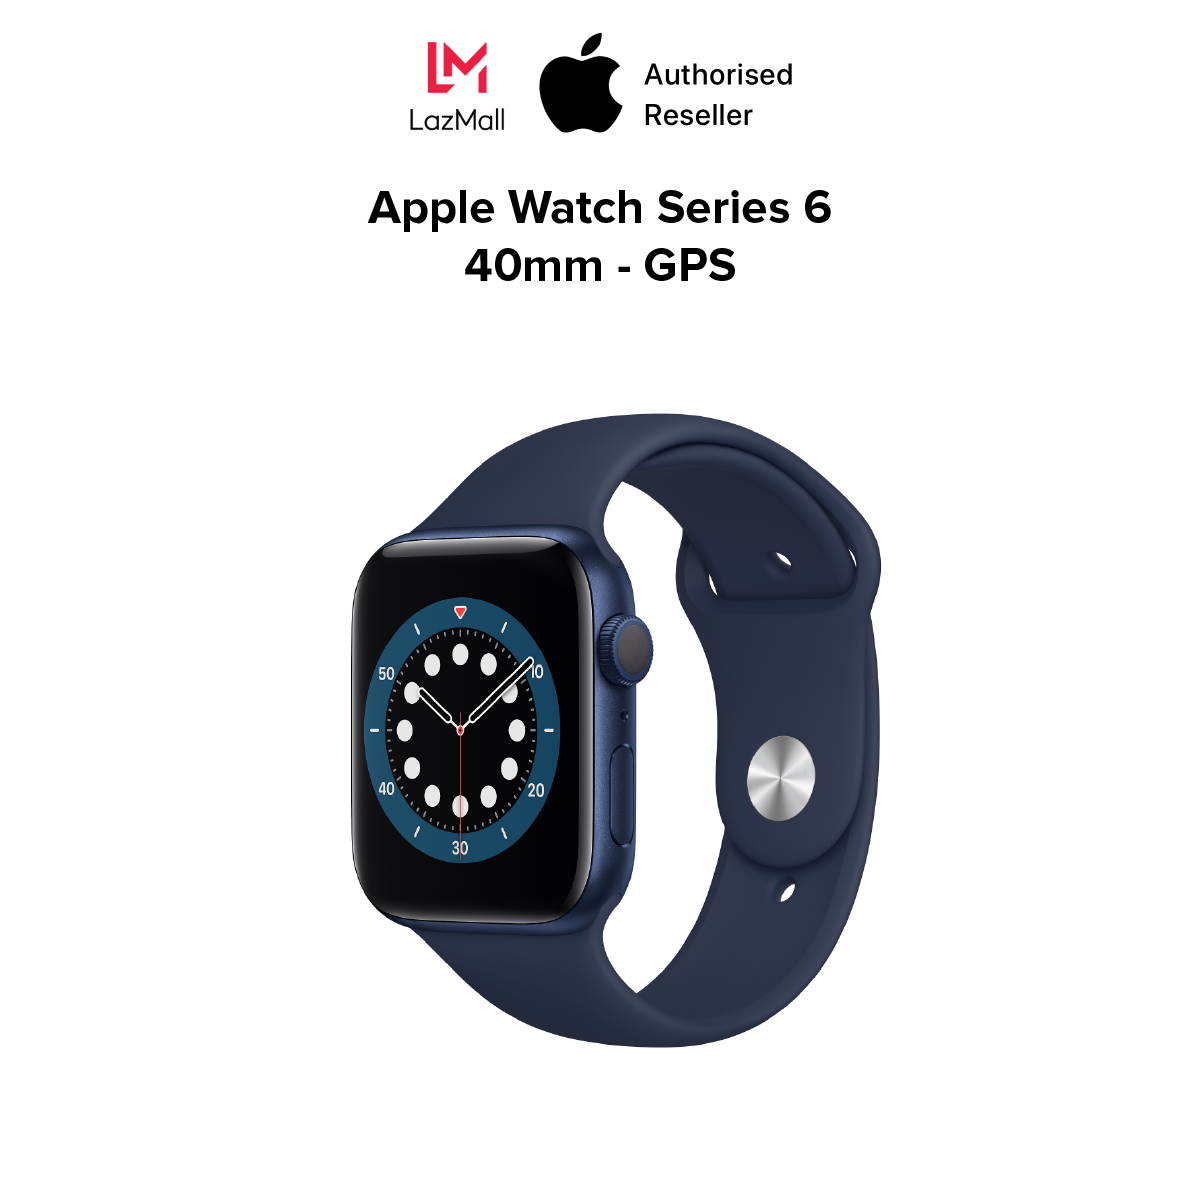 [MEGA SALE 11.11] Apple Watch Series 6 40mm GPS - Genuine VN/A - 100% New (Not Activated, Not Used) - 12 Months Warranty At Apple Service - 0% Installment Payment via Credit card - MG143VN/A / MG123VN/A / M00A3VN/A / MG283VN/A / MG133VN/A